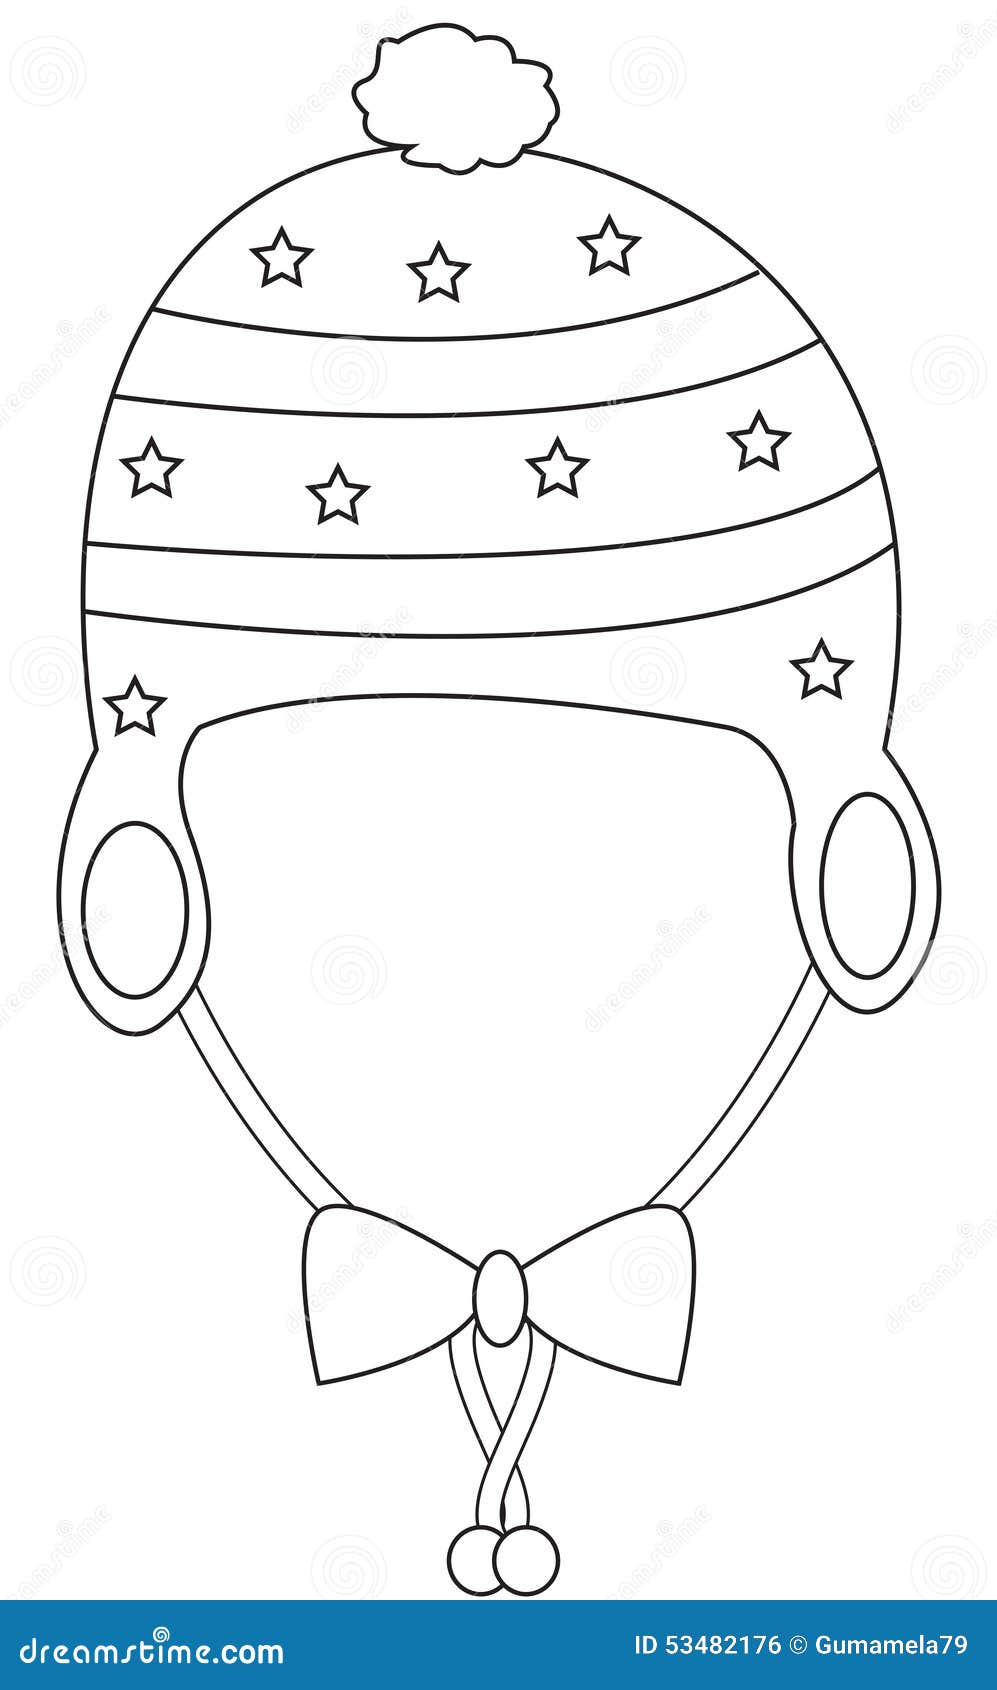 Bonnet coloring page stock illustration illustration of drawing